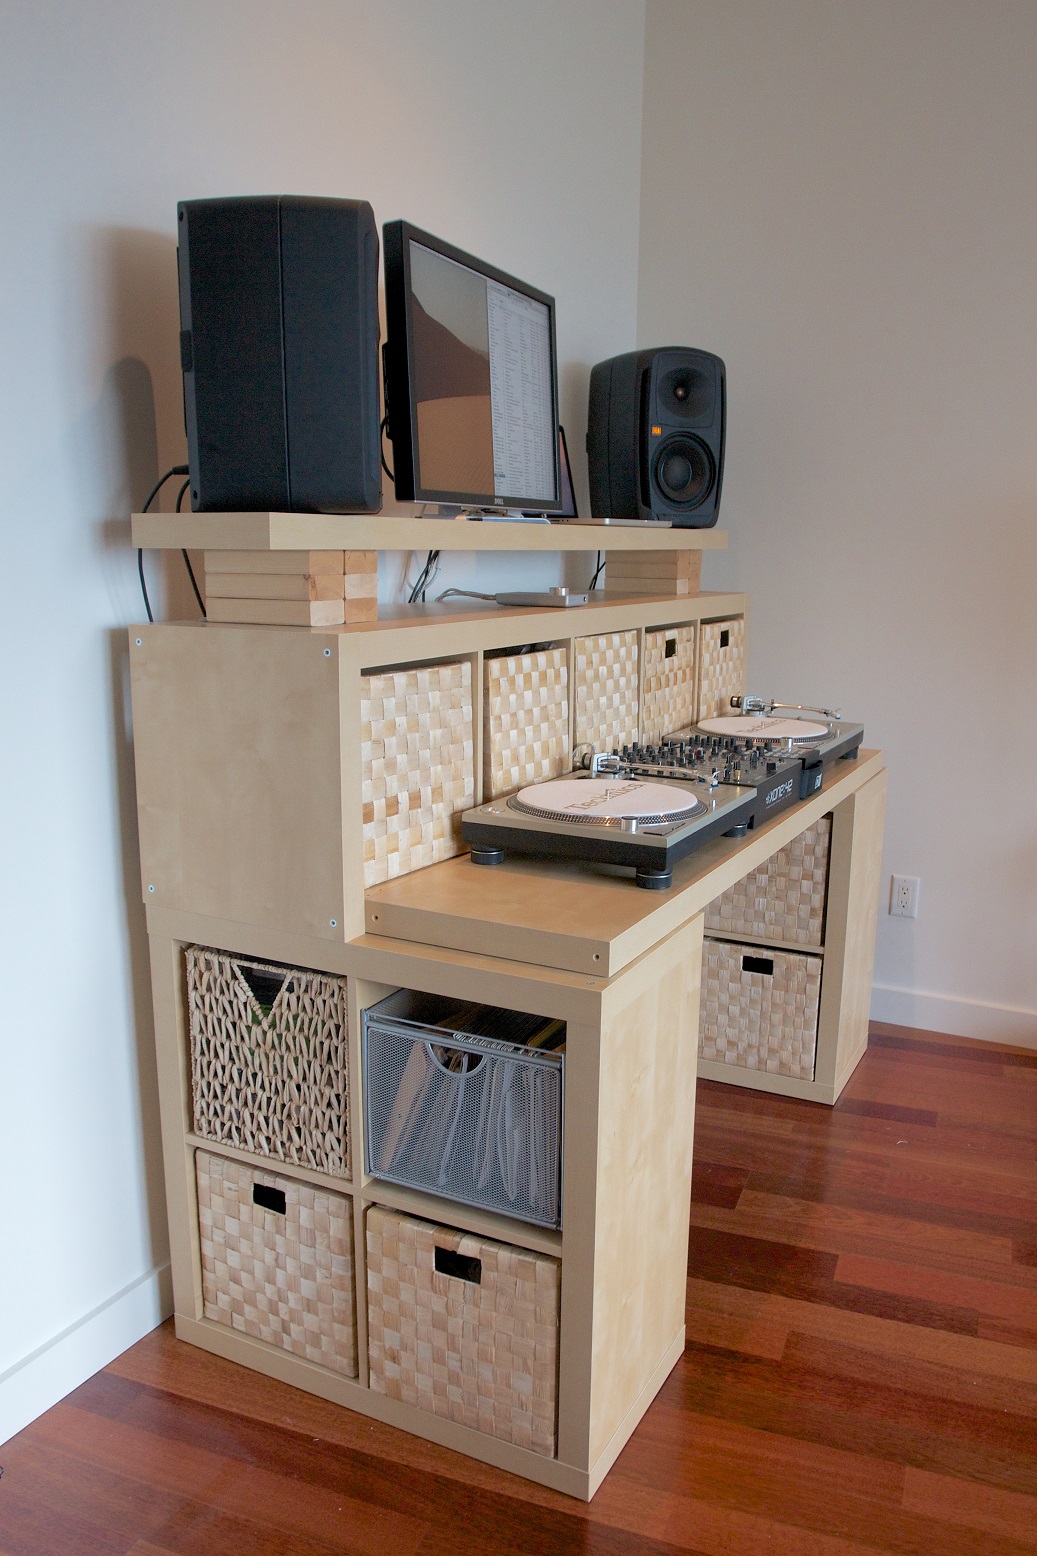 The Spaceship Diy Standing Desk A Massive Attractive And